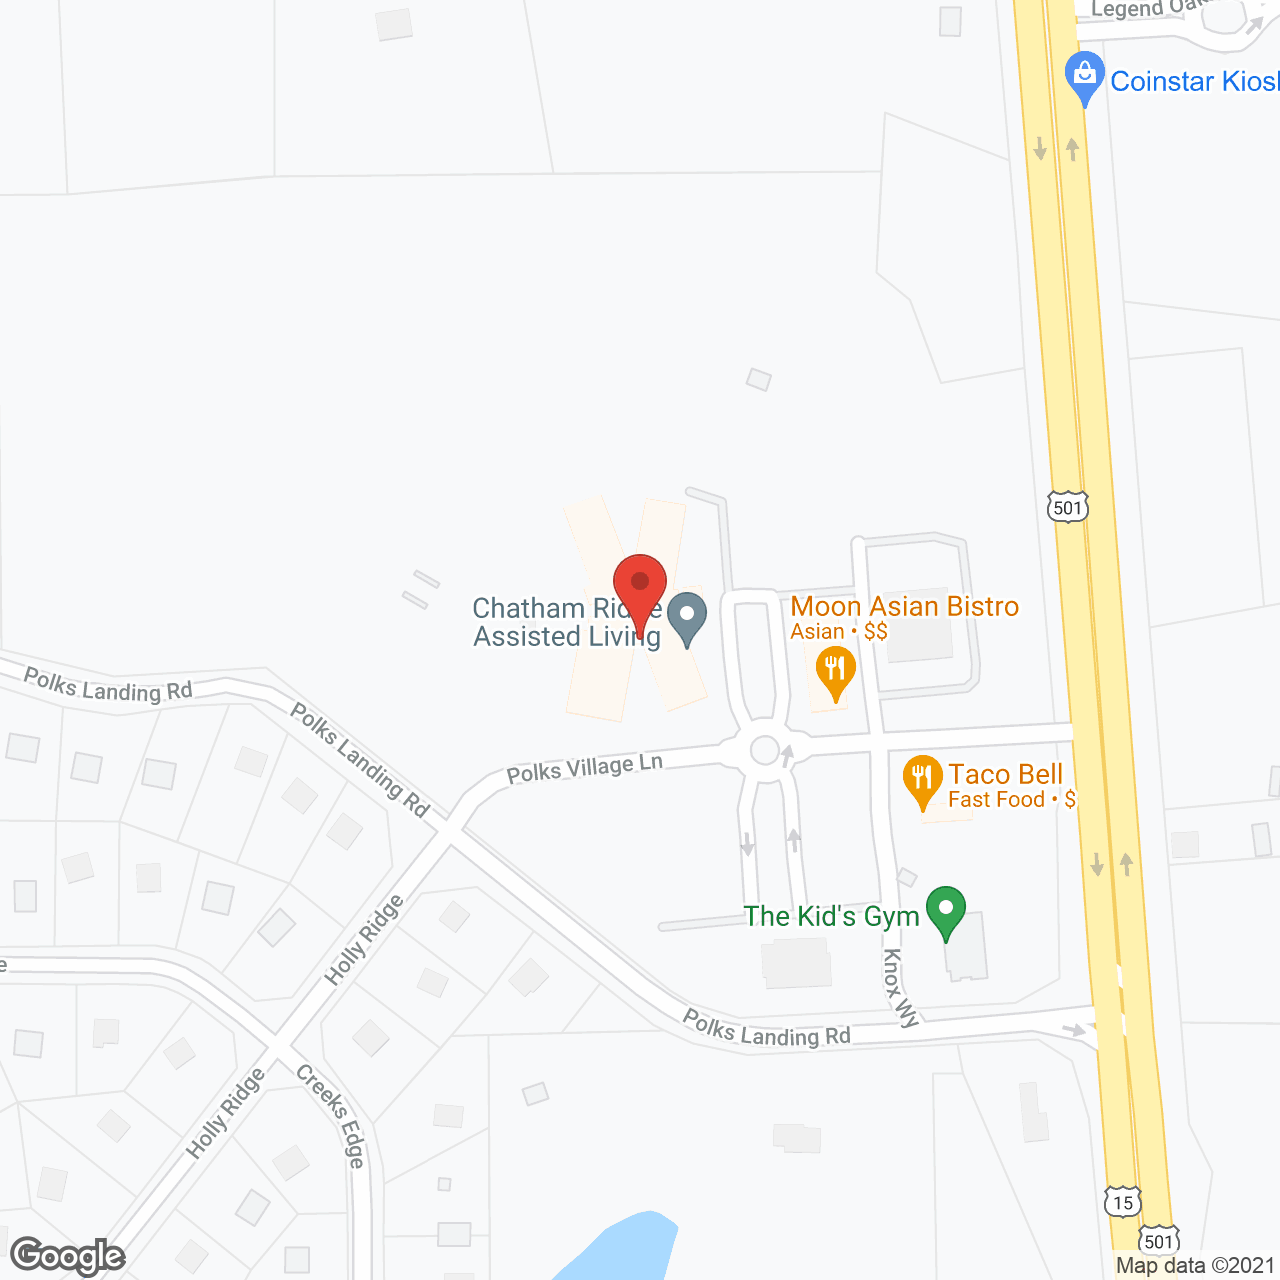 Chatham Ridge Assisted Living in google map